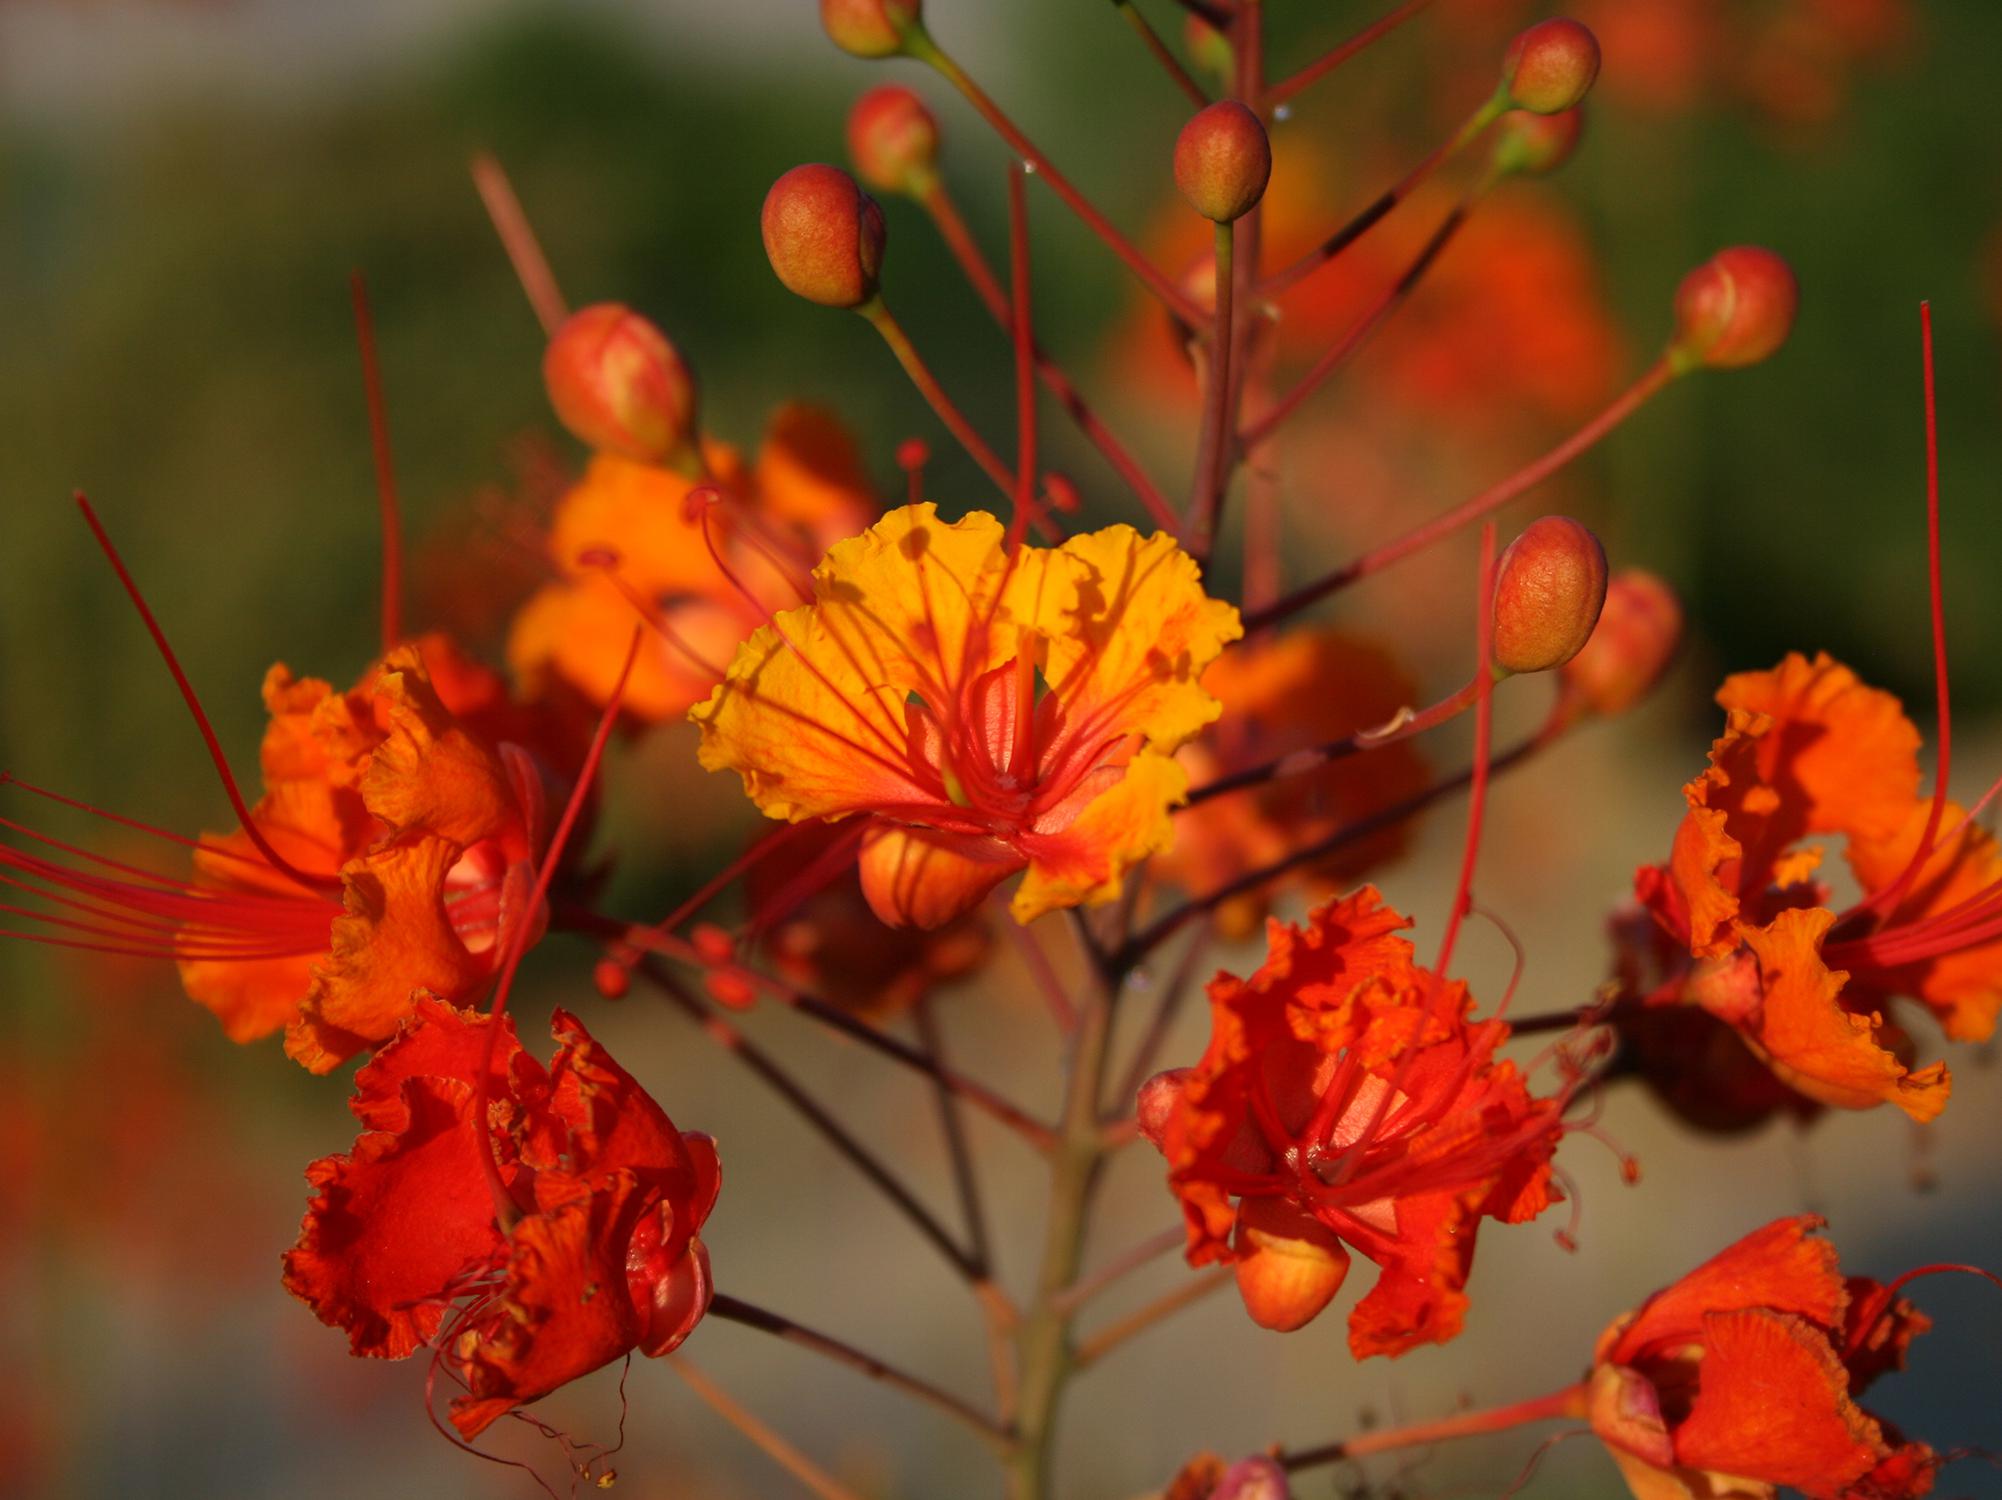 A cluster of orange flowers with red stamens.